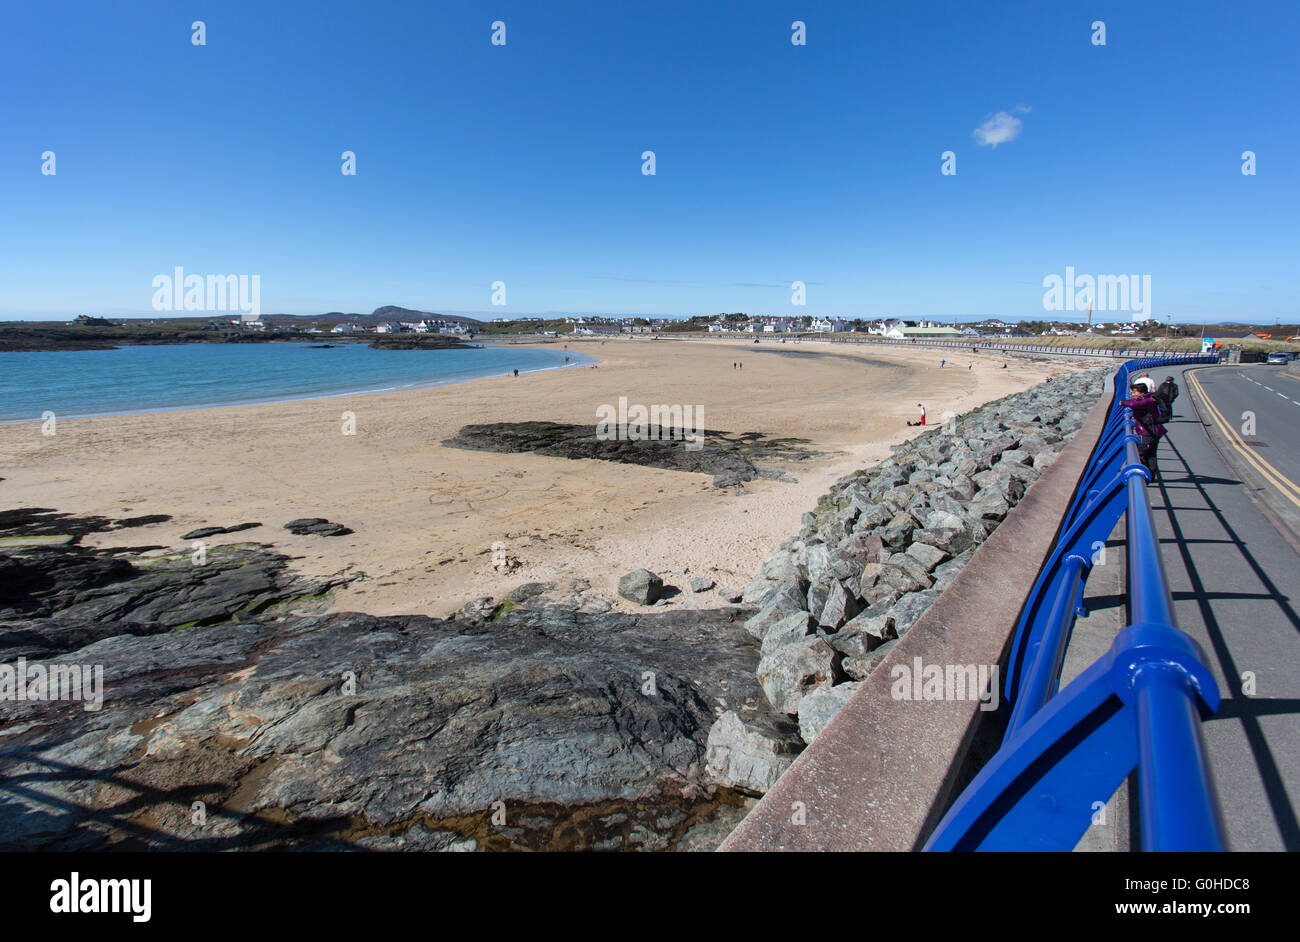 The Wales and Anglesey Coastal Path in North Wales. Picturesque view of Trearddur Bay Beach. Stock Photo